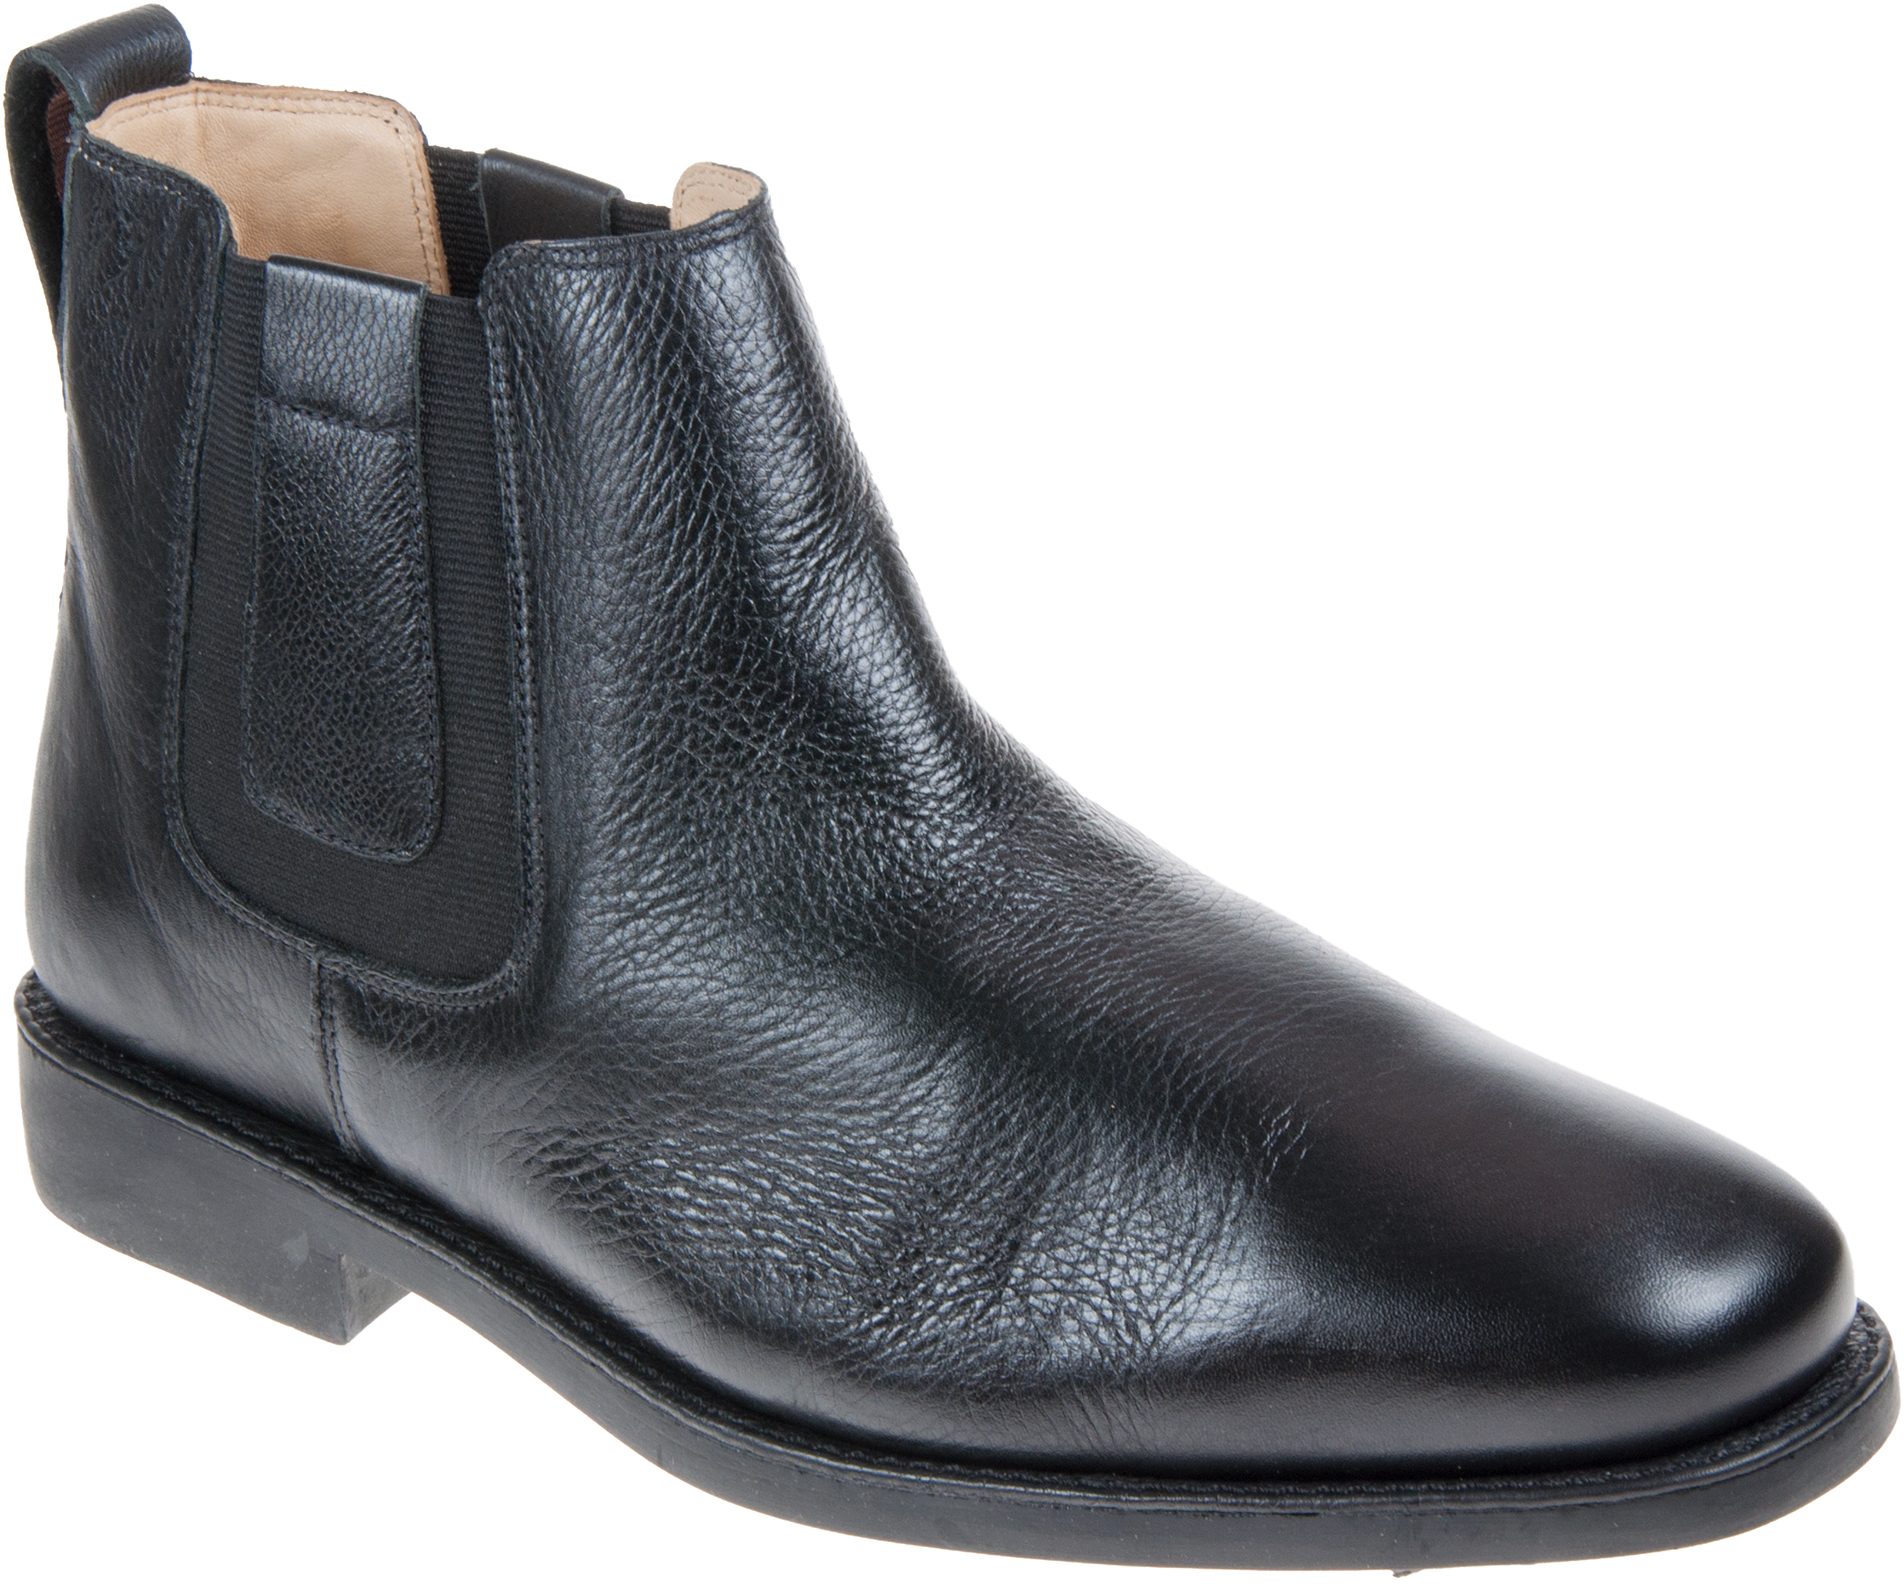 Anatomic & Co Natal Black 818153 - Formal Boots - Humphries Shoes